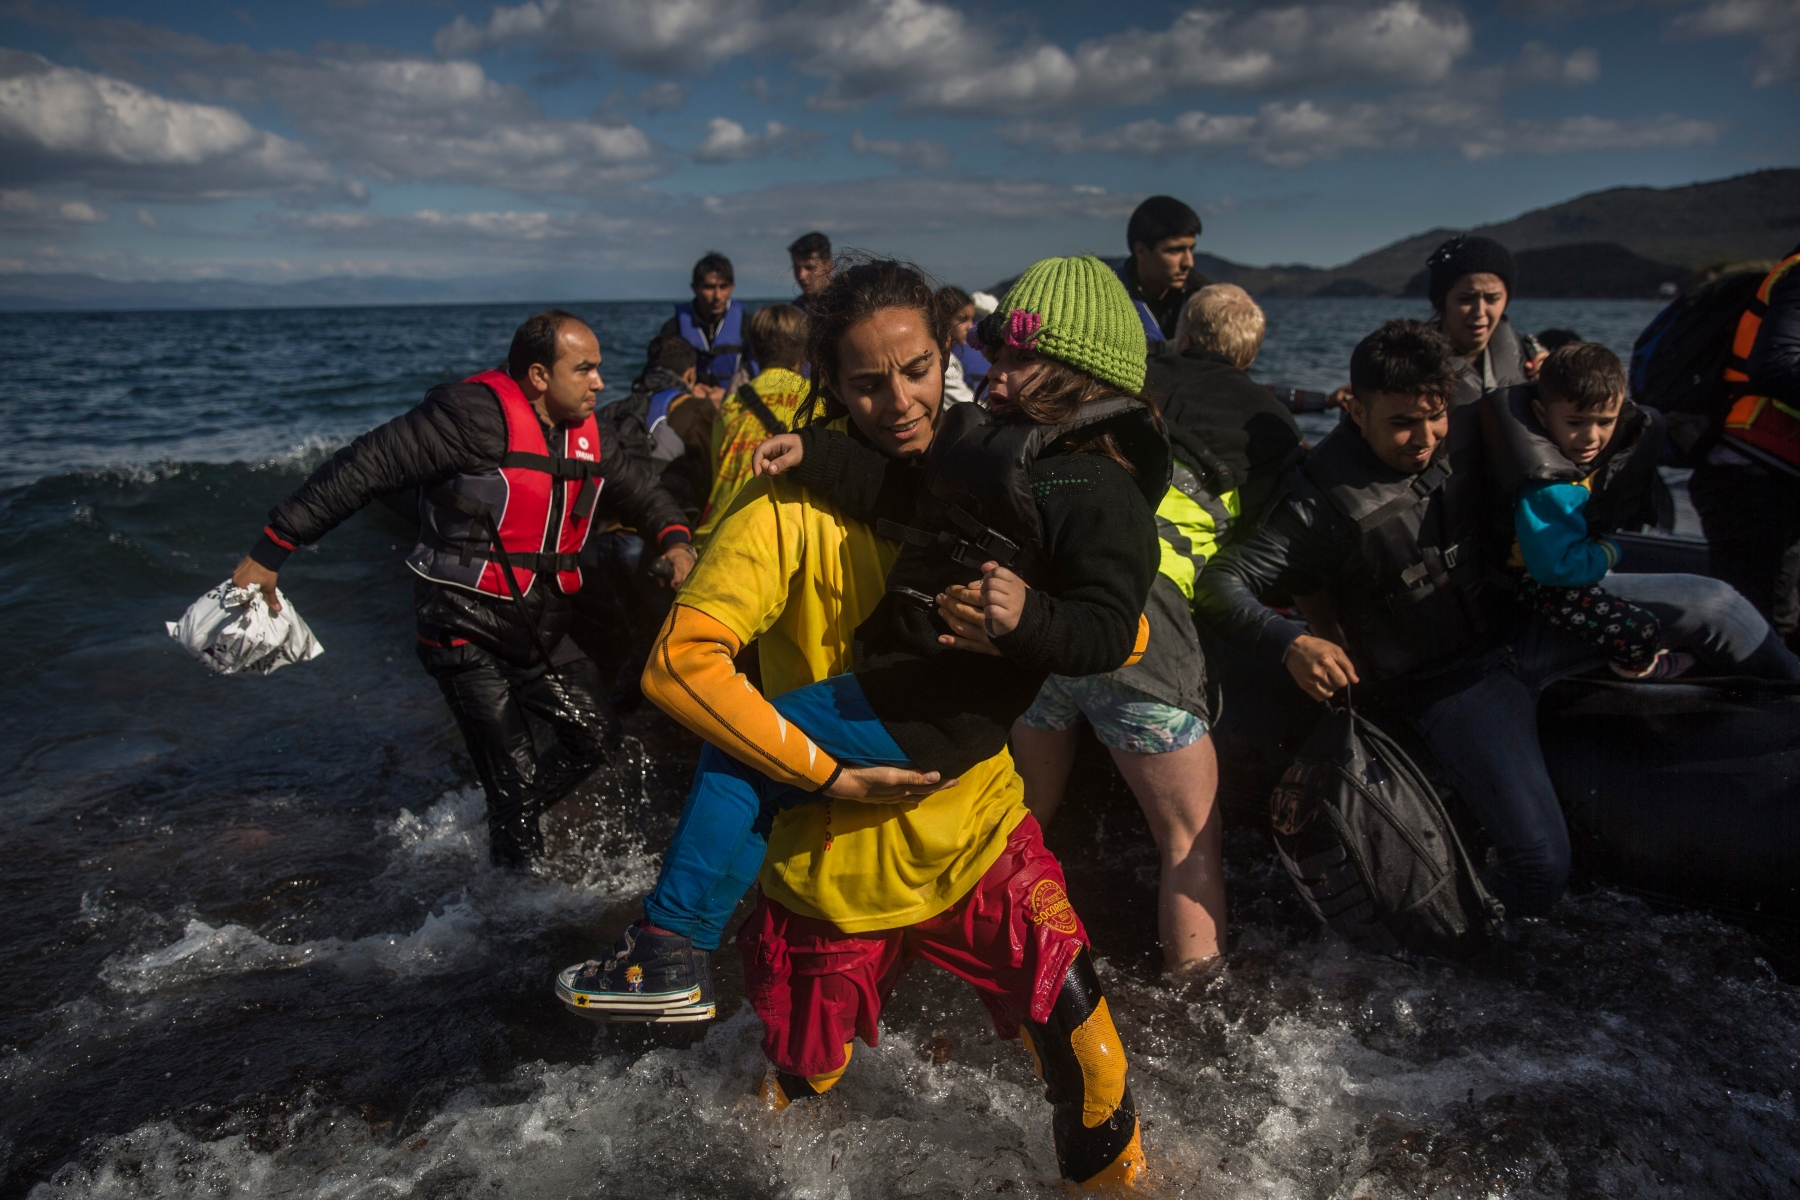 In this picture made on Sunday, Oct. 25, 2015, Fiorella Crotti  member of Spanish rescue group Proactiva Open Arms carries a young kid as migrants and refugees disembark from a dinghy after crossing the Aegean sea from Turkey to the Greek island of Lesbos.  As this Greek island struggles with a huge migrant surge, a close-knit group of volunteers, many from overseas, work alongside Greek fishermen to rescue people at sea, provide medical care and bring comfort and basic necessities.(AP Photo/Santi Palacios) Europe Migrants Helpers